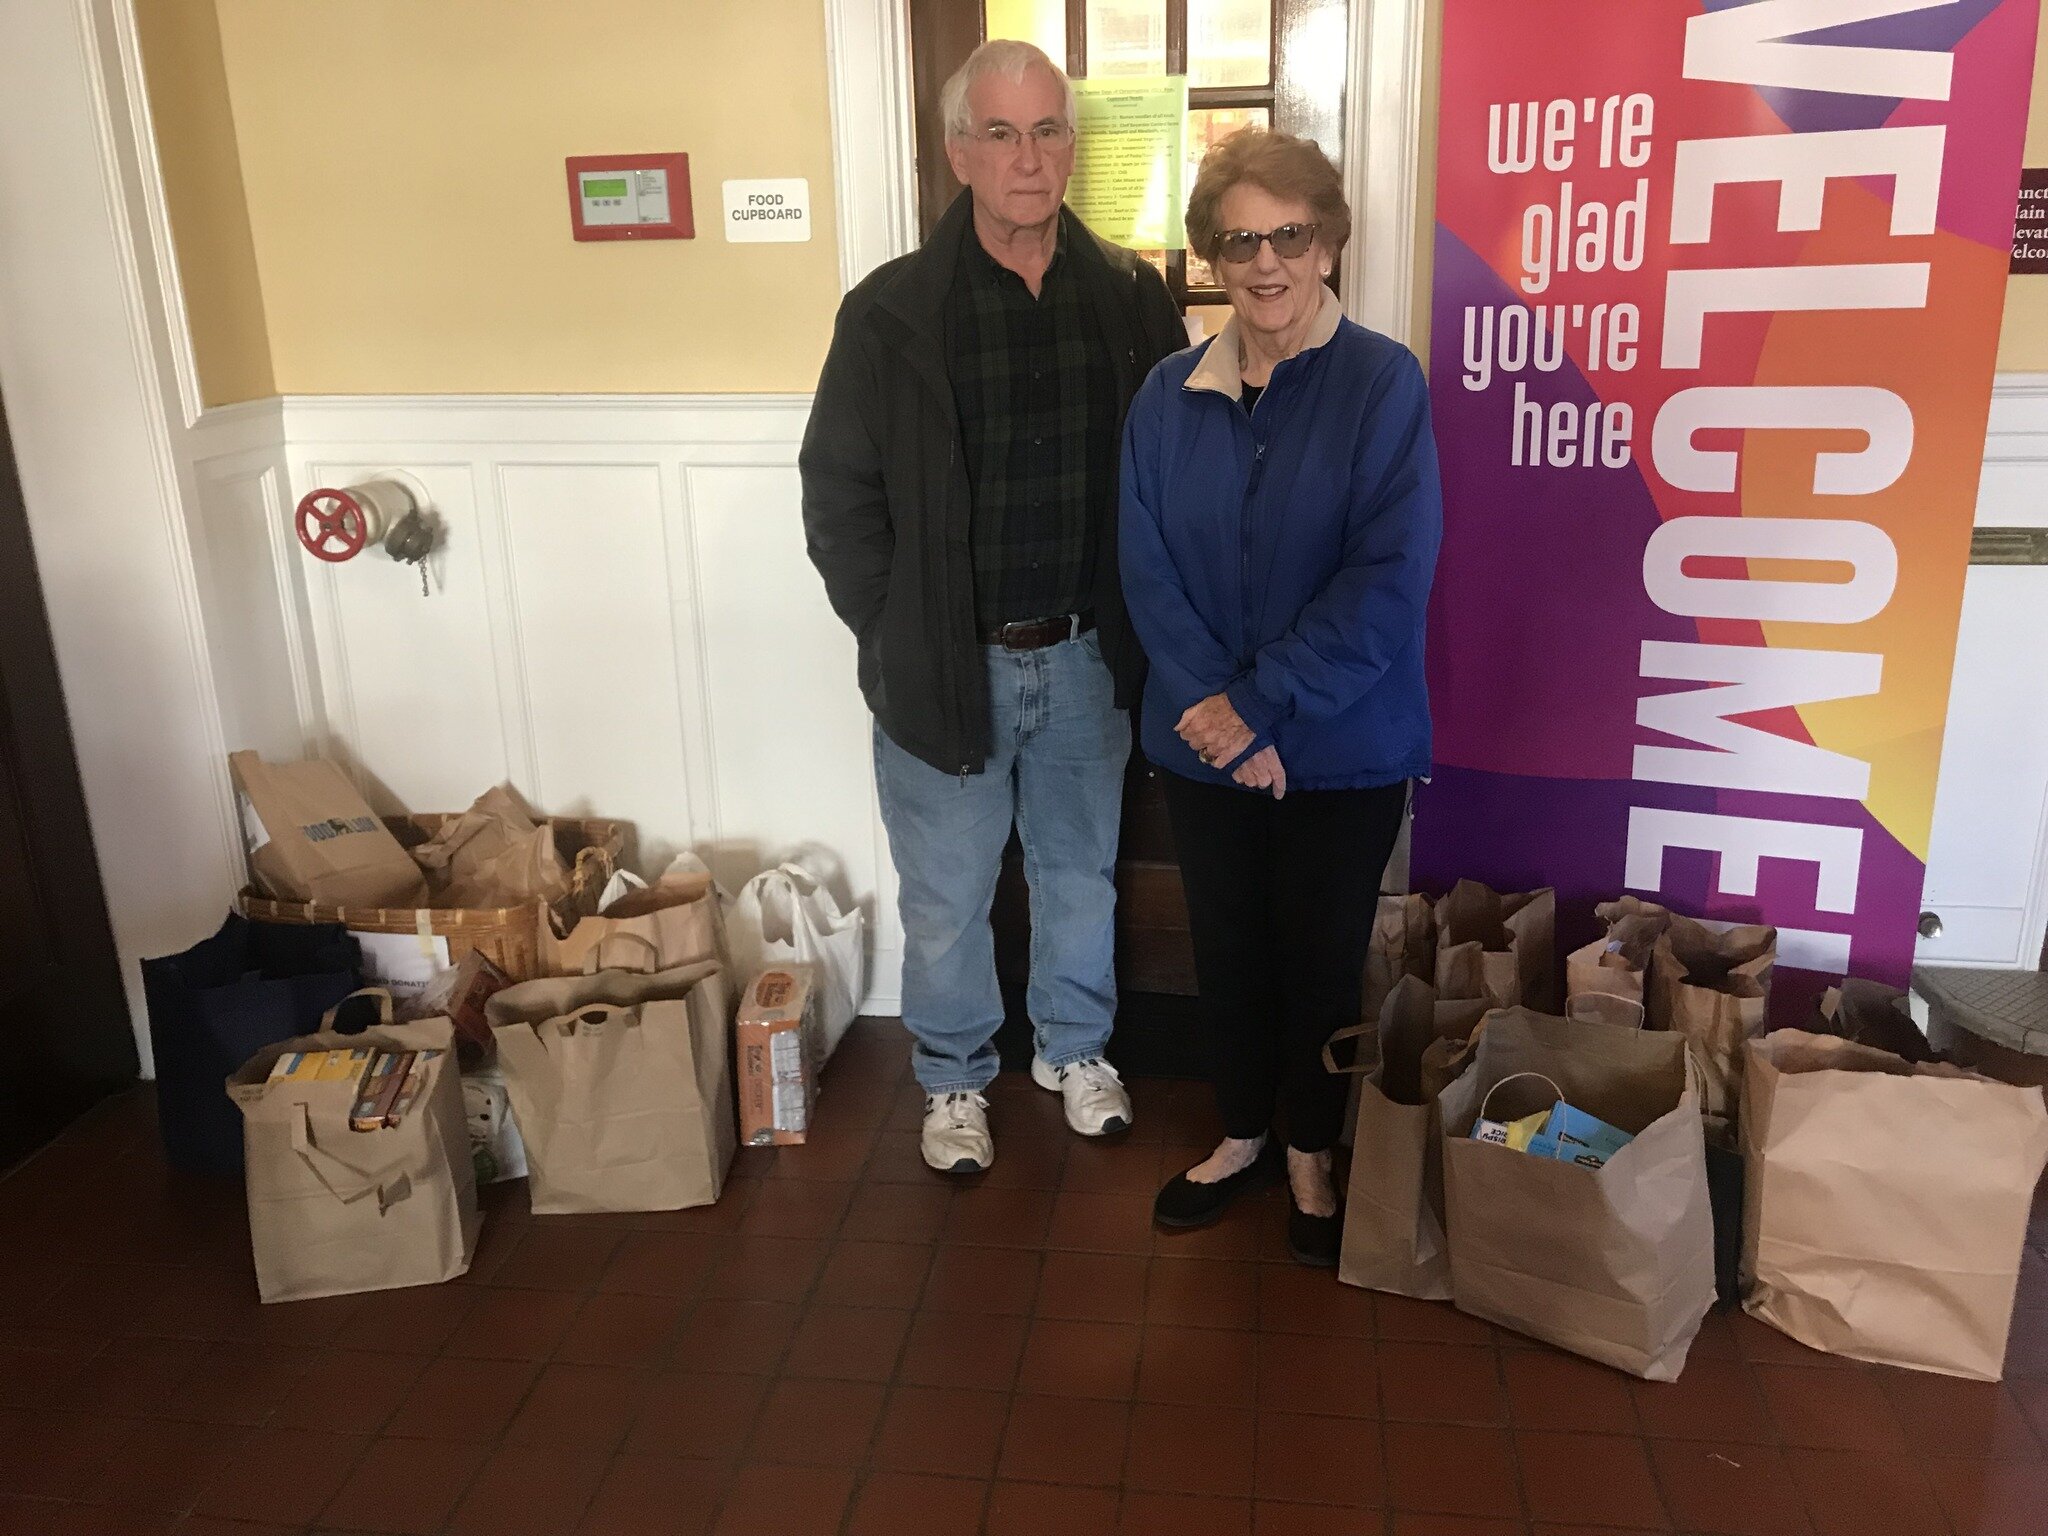 Special thanks to Steve and Sheila from First Presbyterian Church, who collected and dropped off 15 bags of food! We were able to immediately stock the NAWC Food Cupboard shelves with the contribution. 
 #neighborshelpingneighbors #communityservice